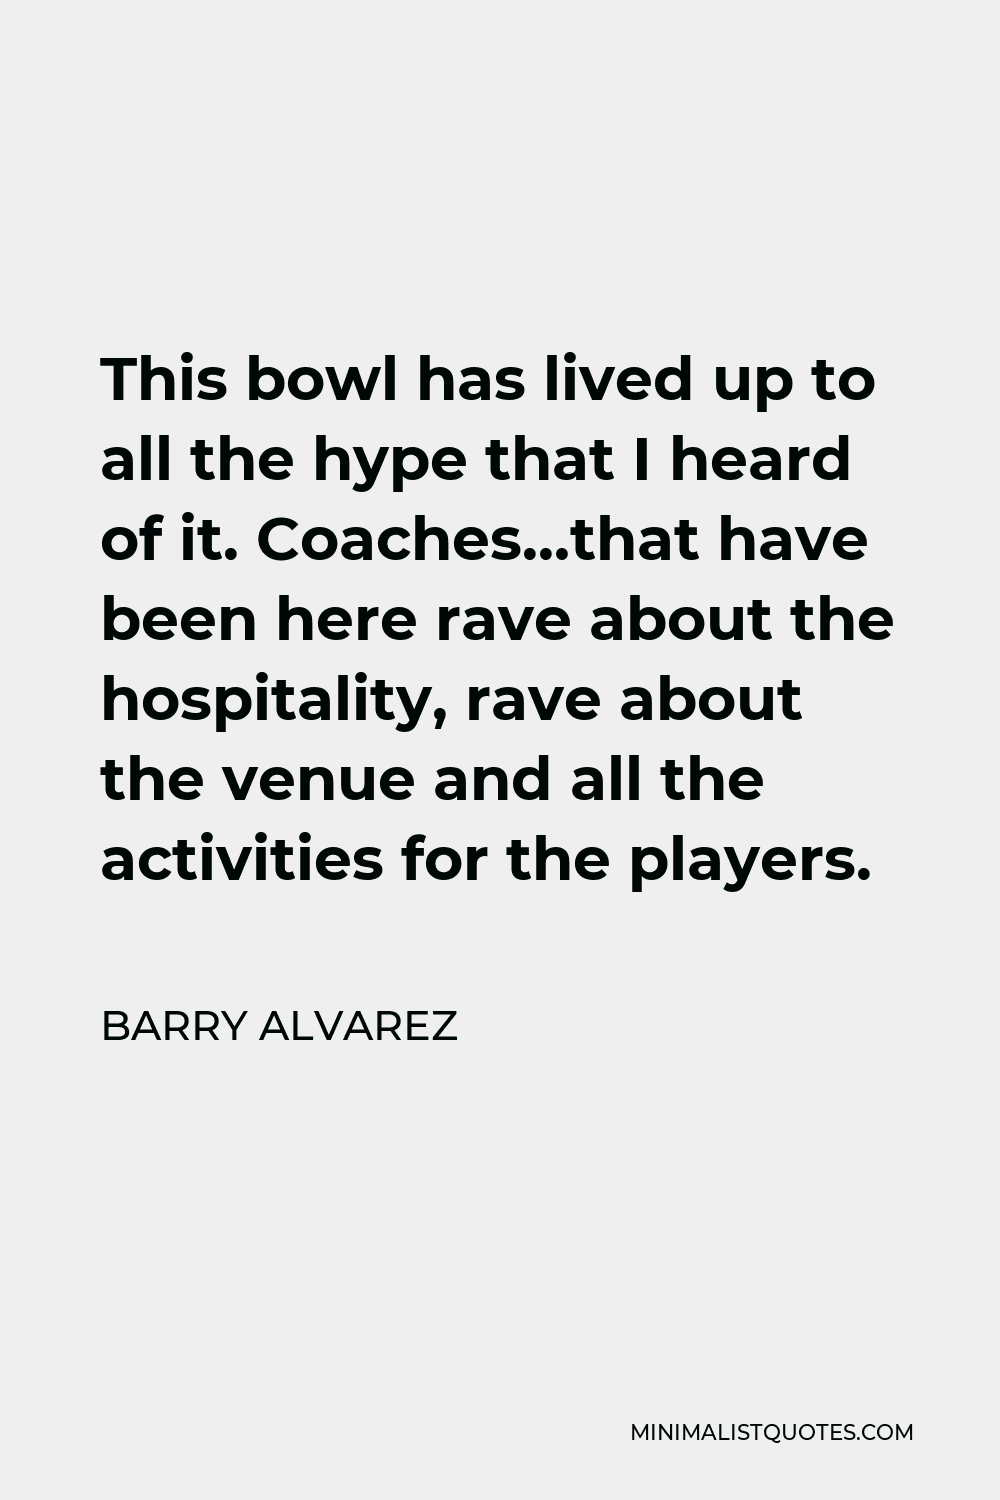 Barry Alvarez Quote - This bowl has lived up to all the hype that I heard of it. Coaches…that have been here rave about the hospitality, rave about the venue and all the activities for the players.